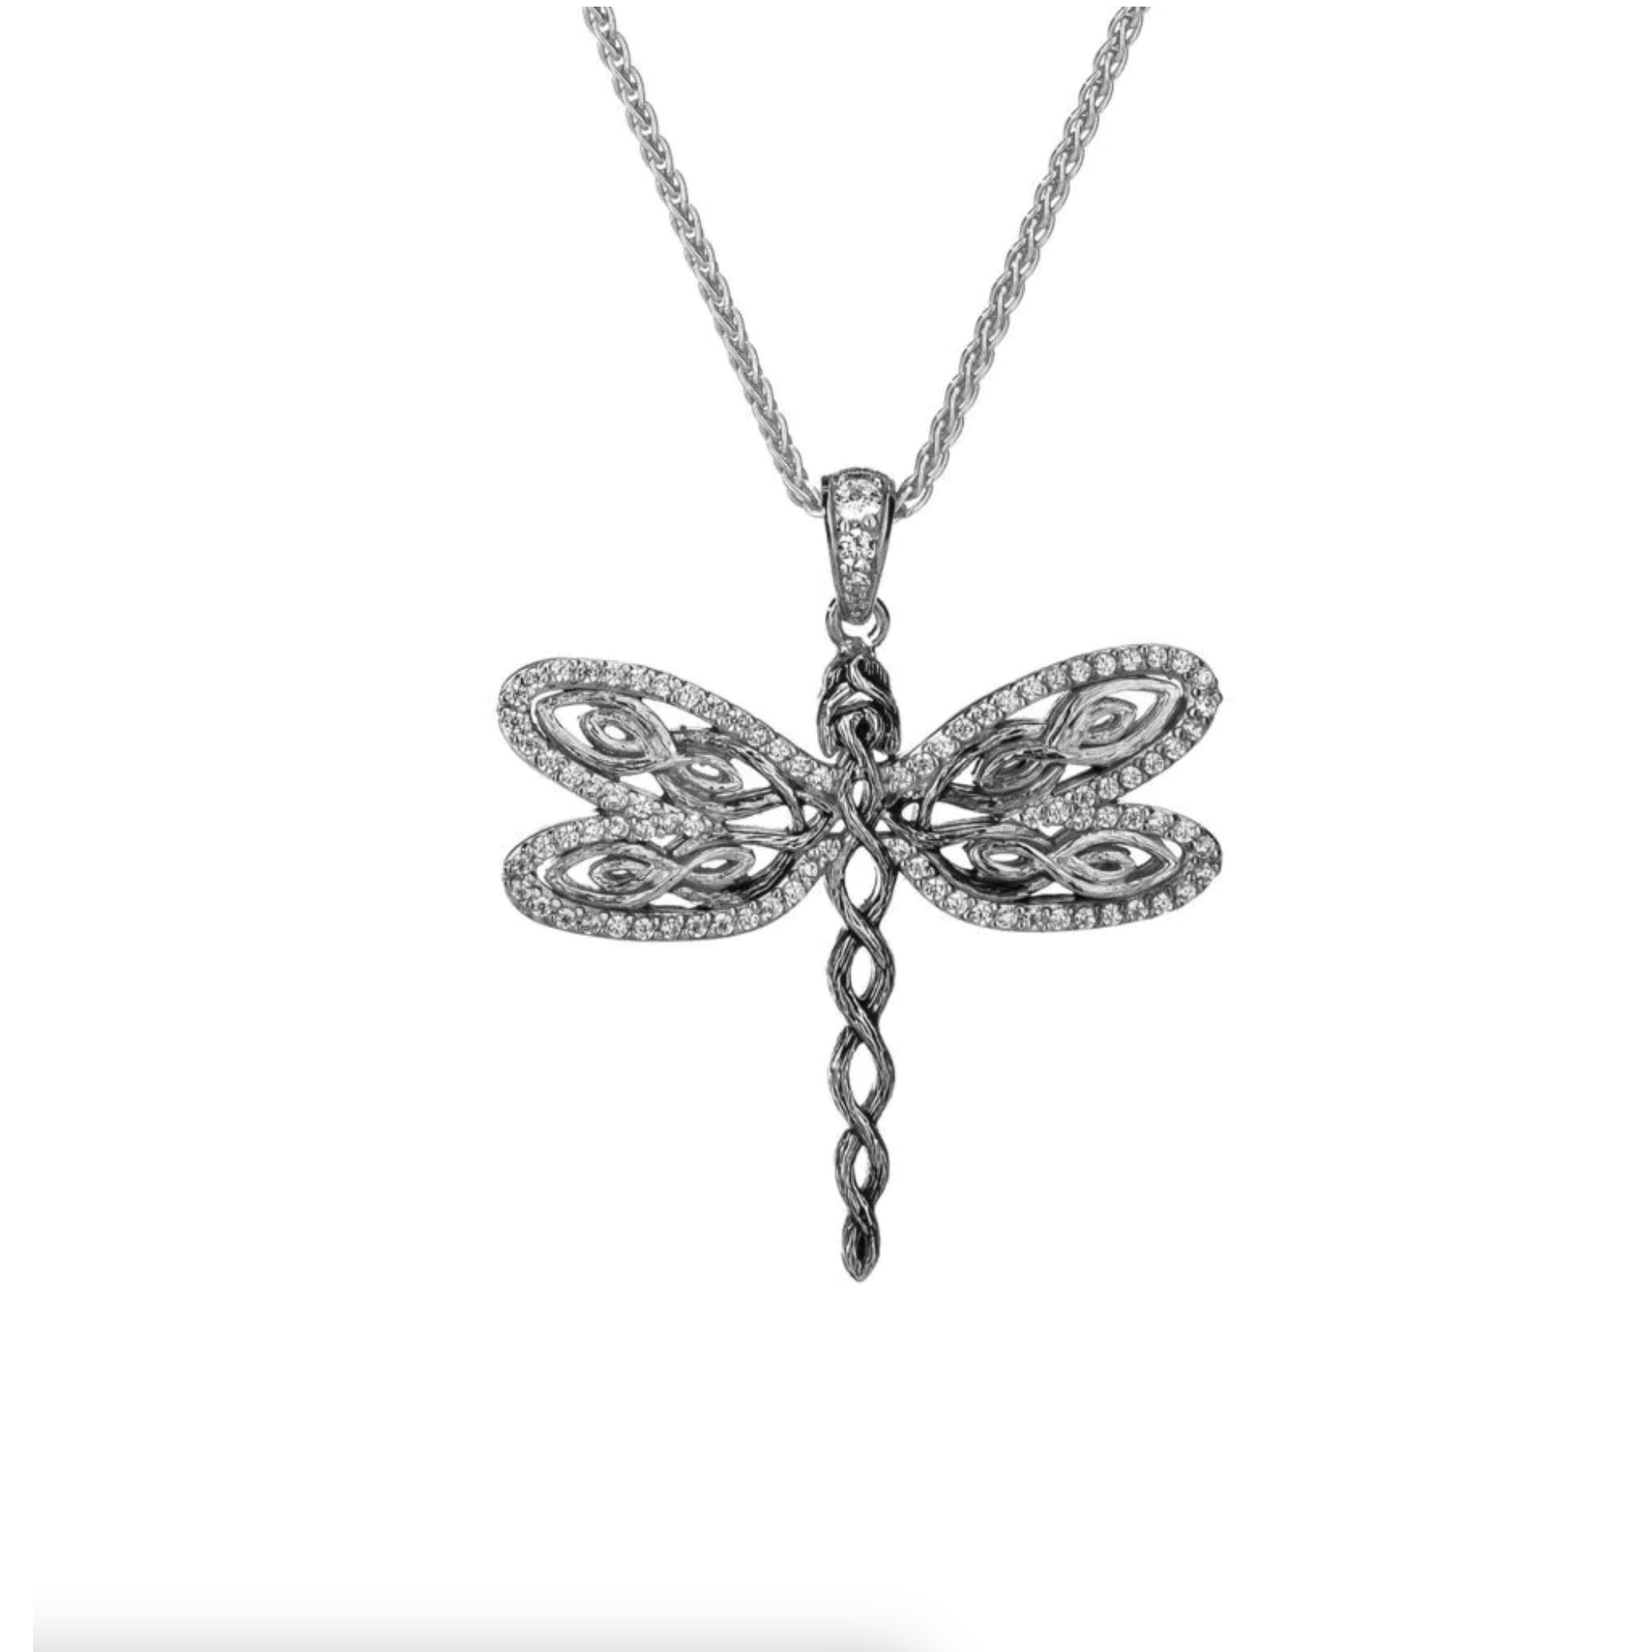 Keith Jack Silver Dragonfly Necklace